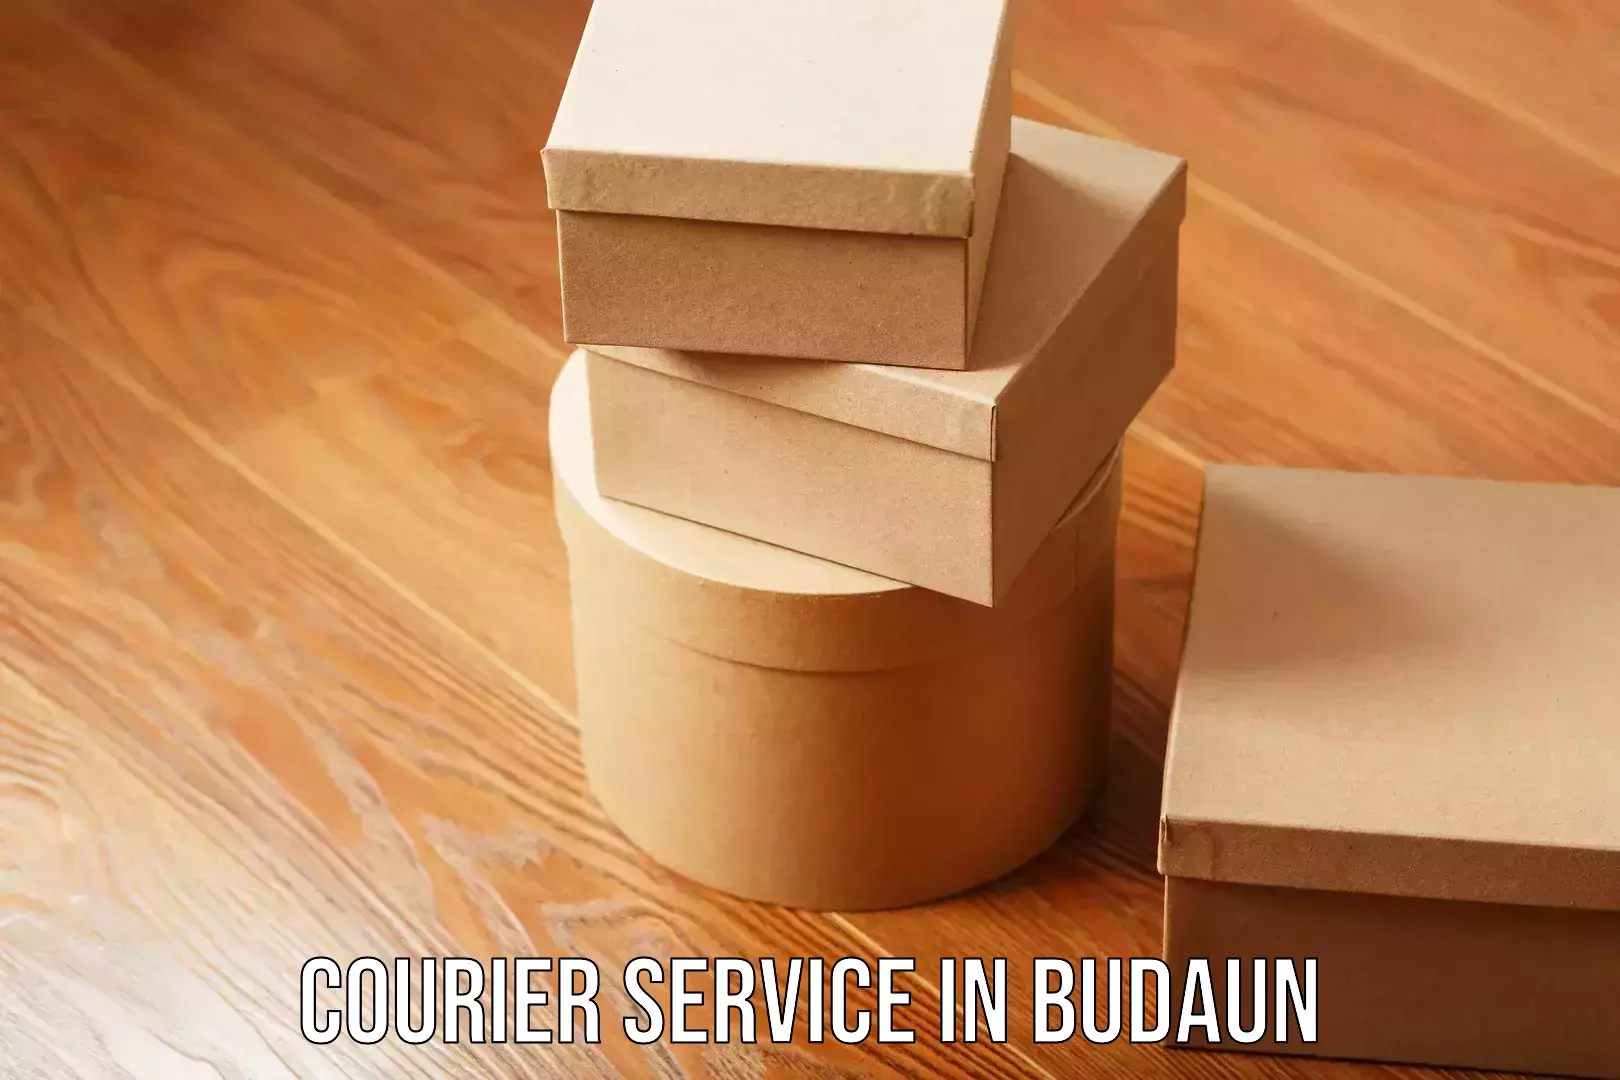 Comprehensive parcel tracking in Budaun